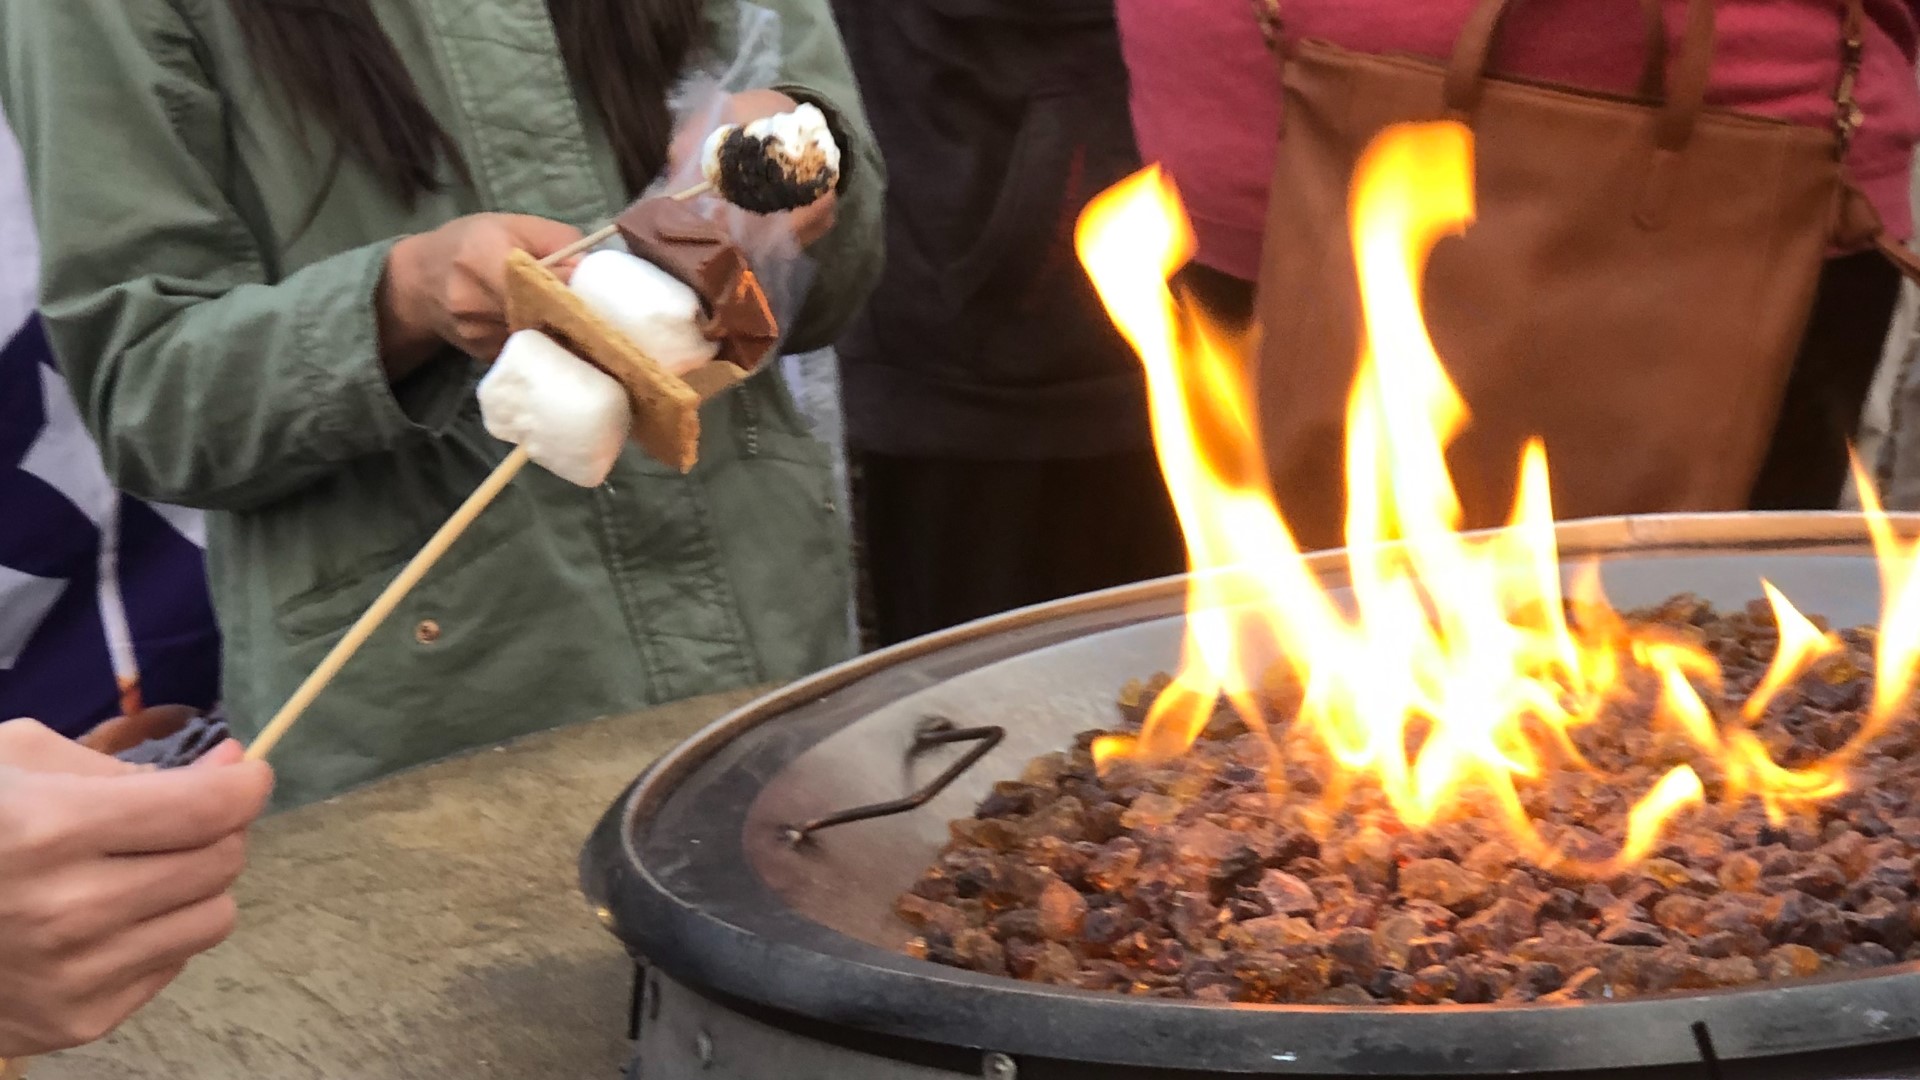 Solo Stove will attempt to break the Guinness world record for the most people making s'mores simultaneously. Limited tickets are now available.